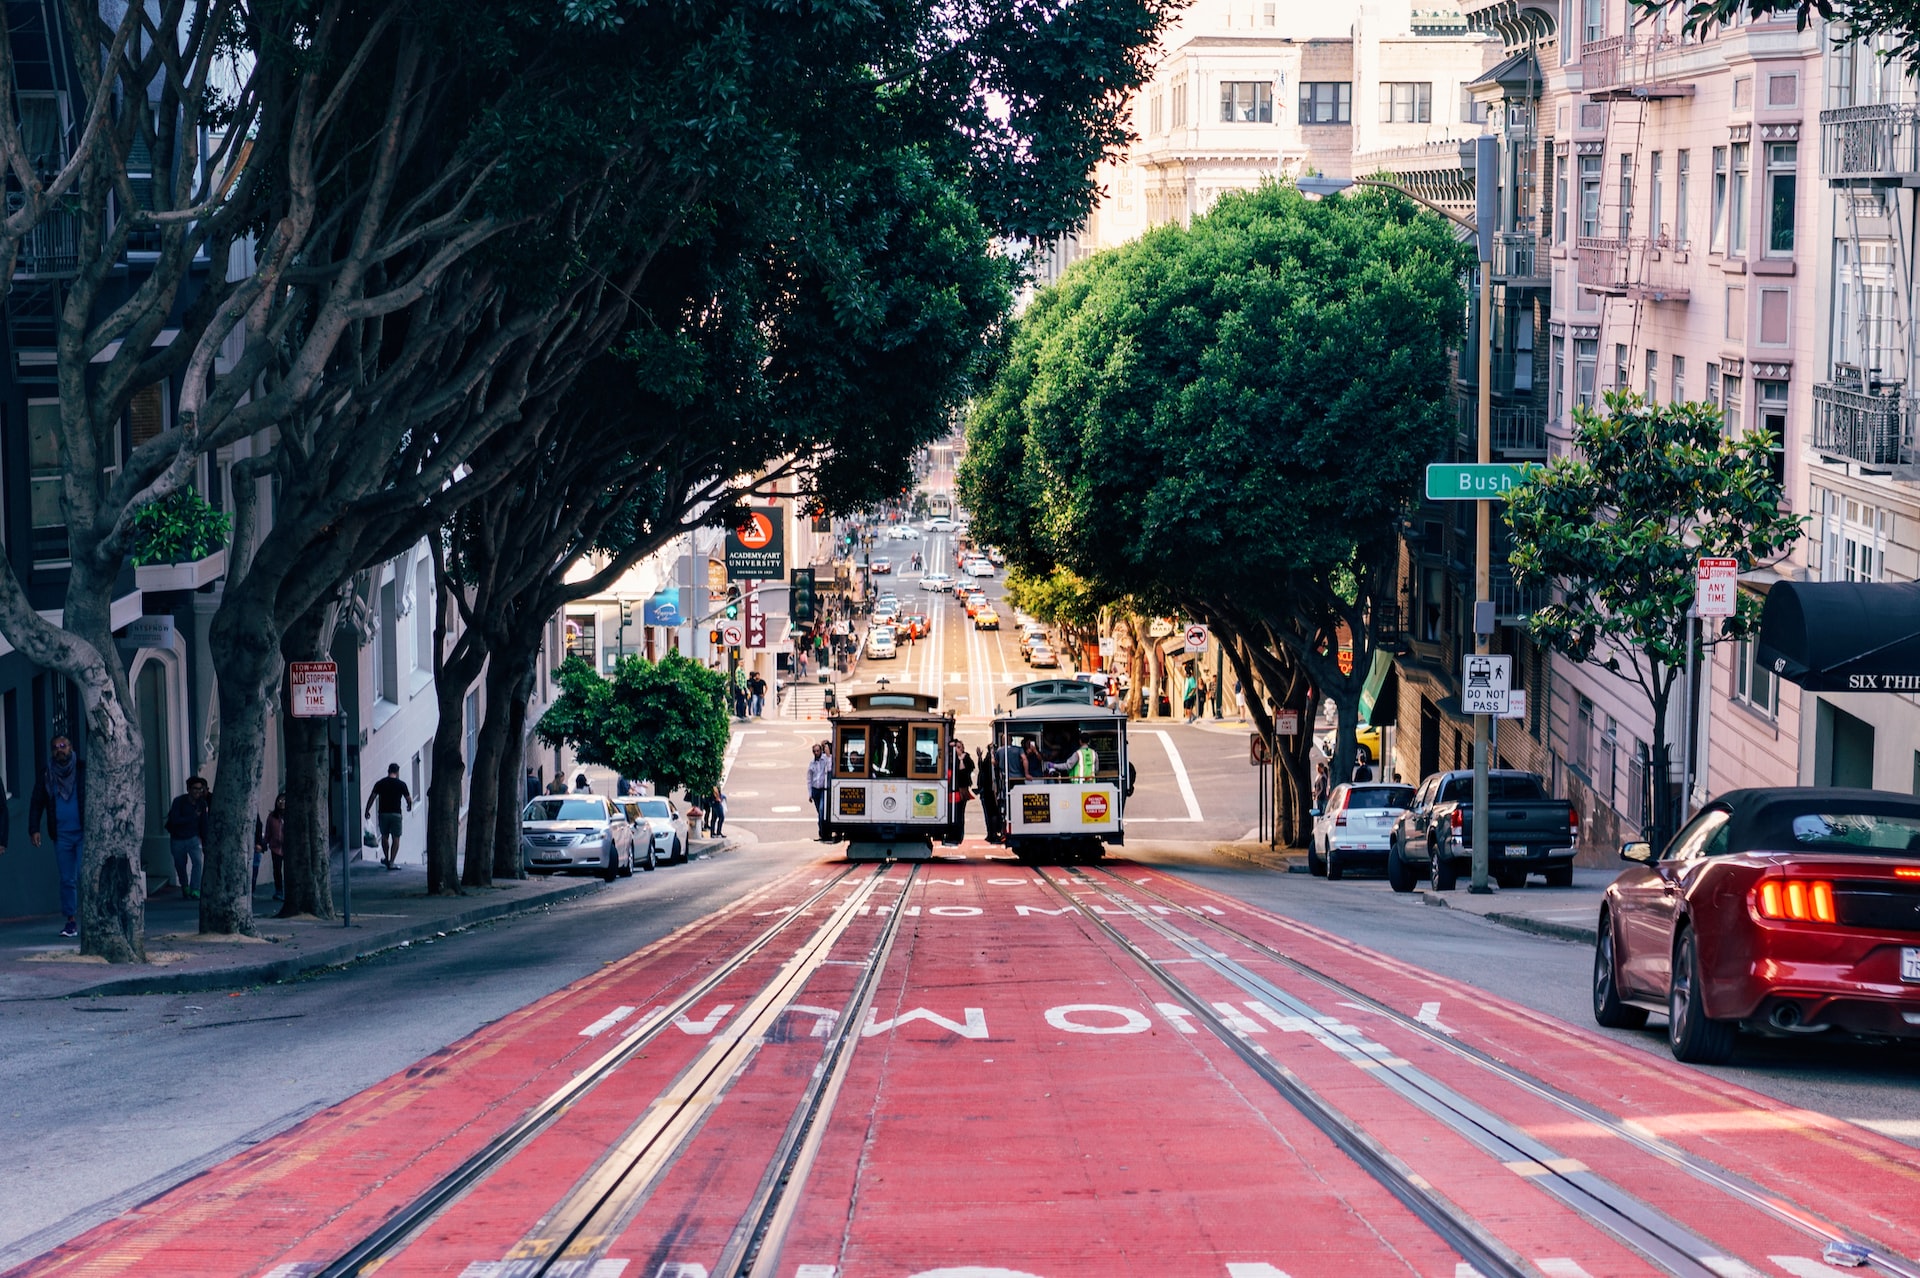 Two trolley cars on a steep hill road in San Francisco.